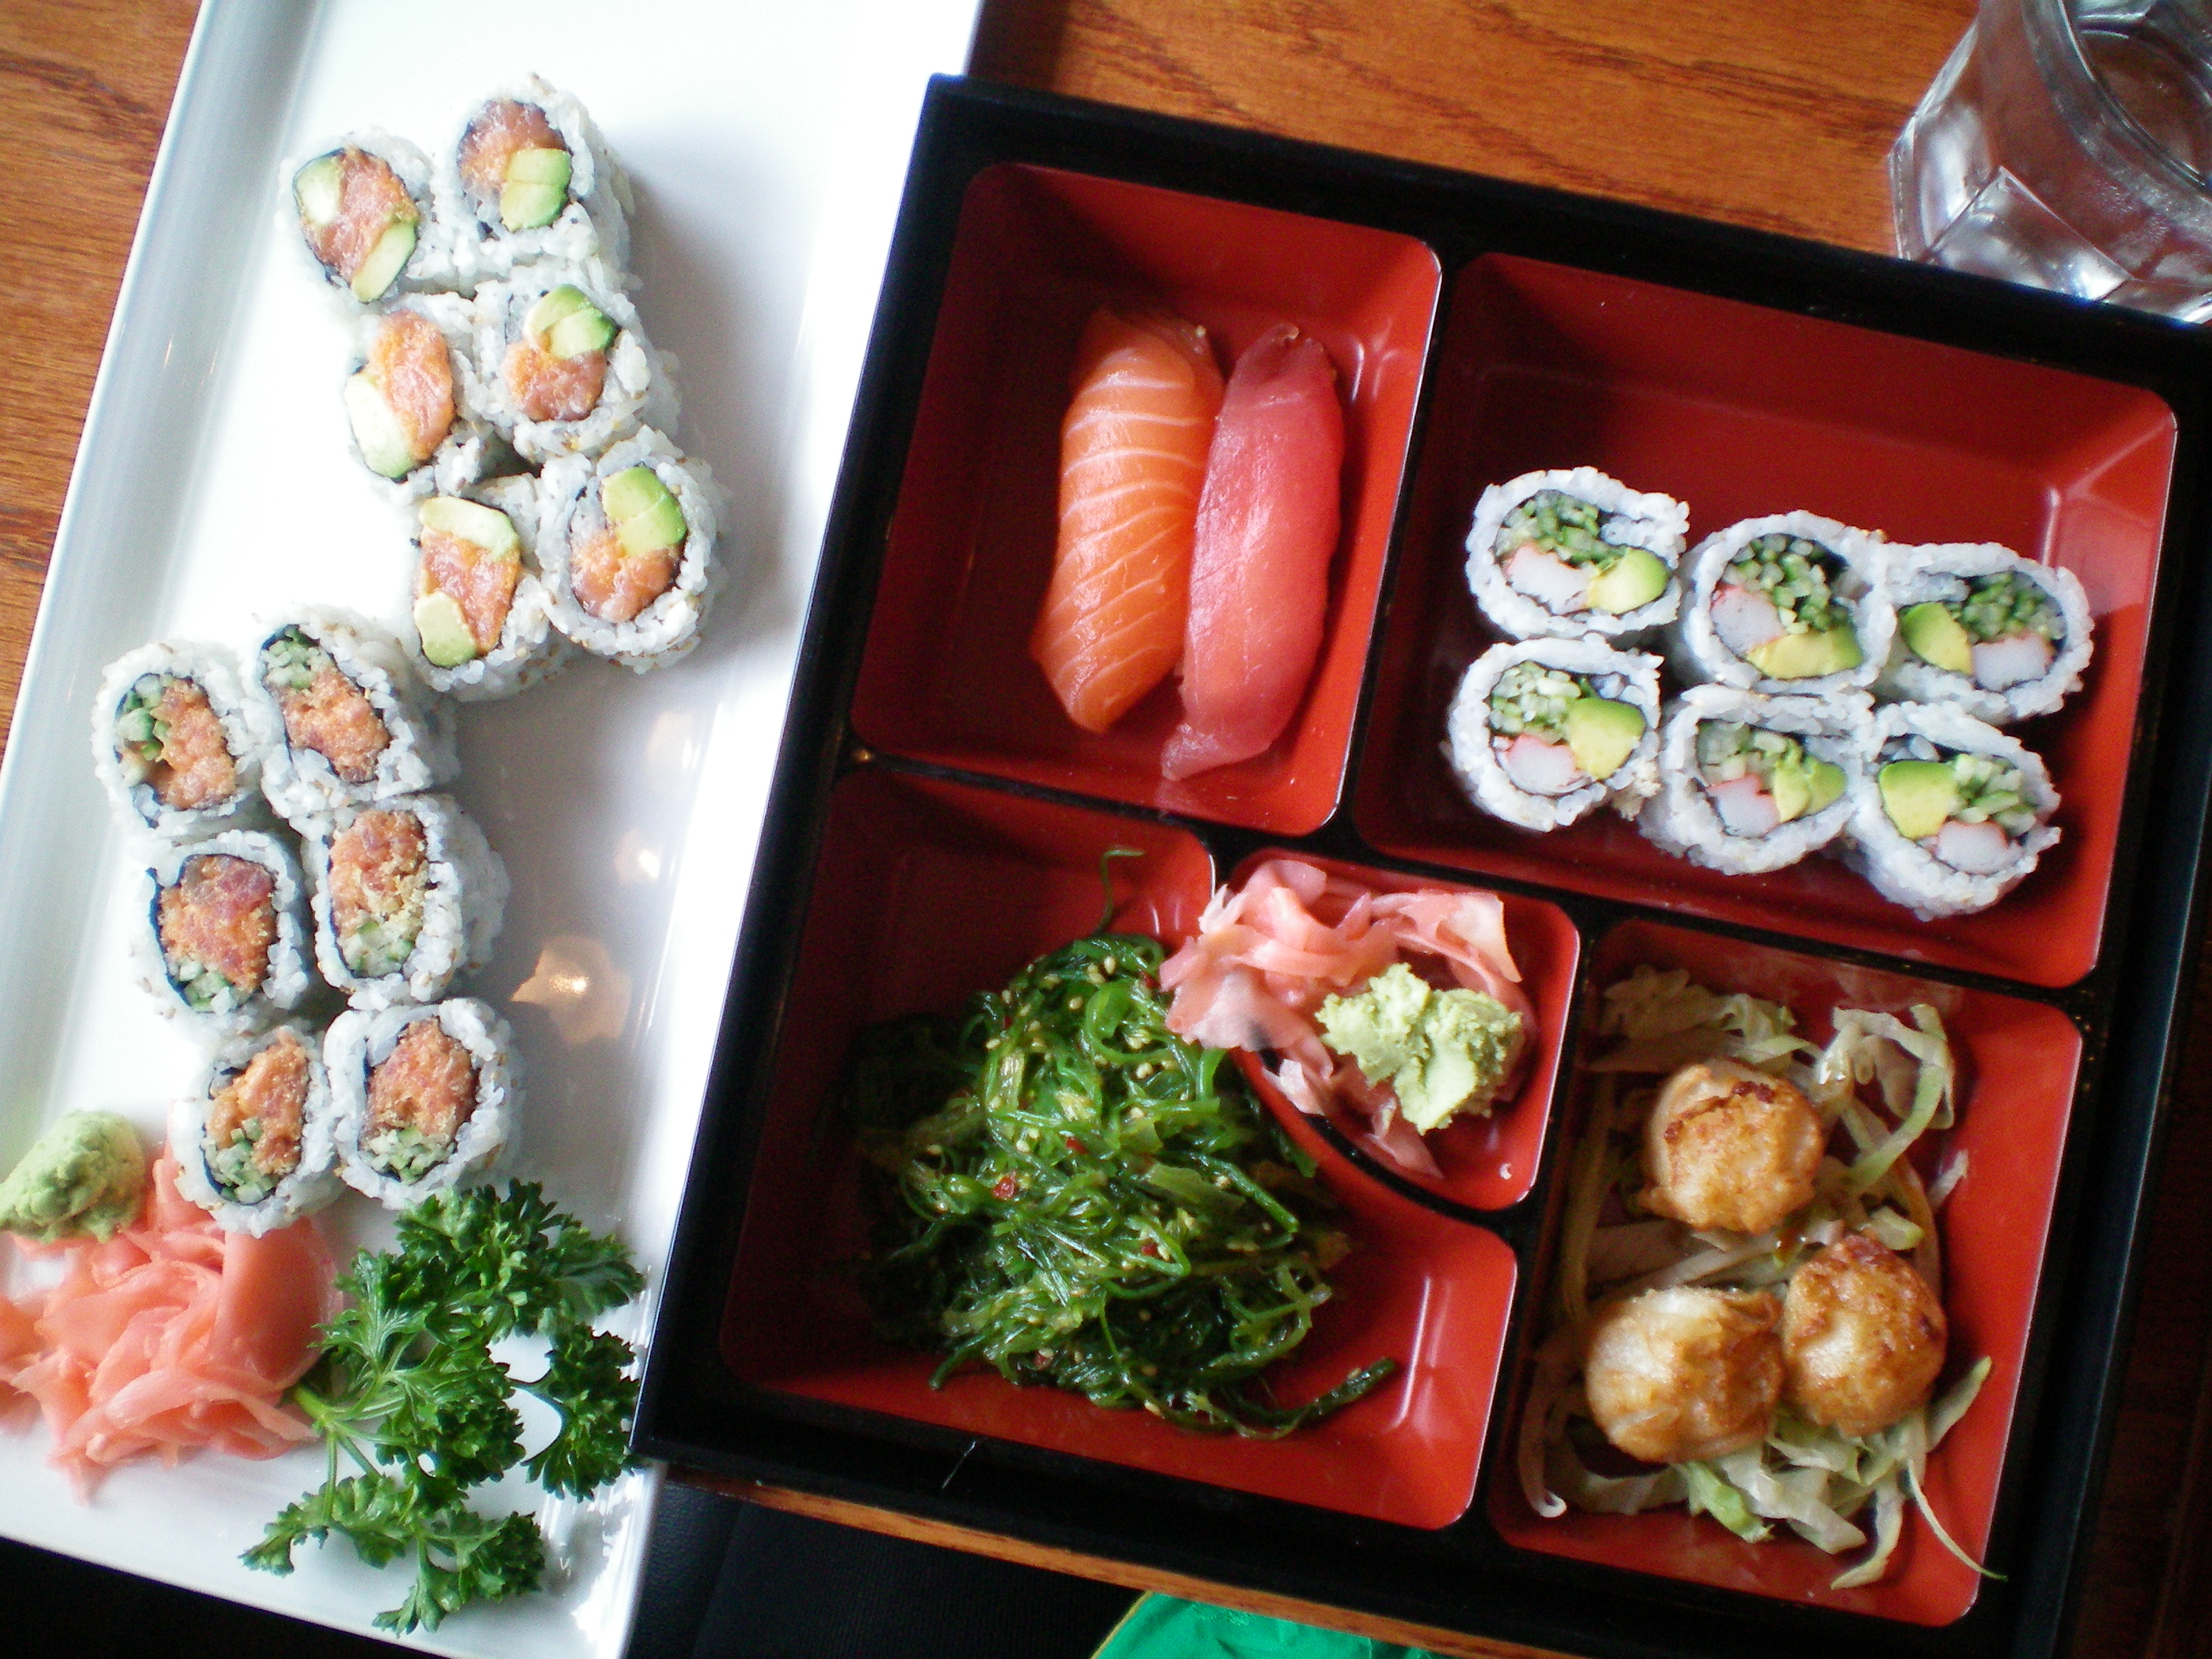 What's the healthiest thing you can order at a sushi restaurant ...